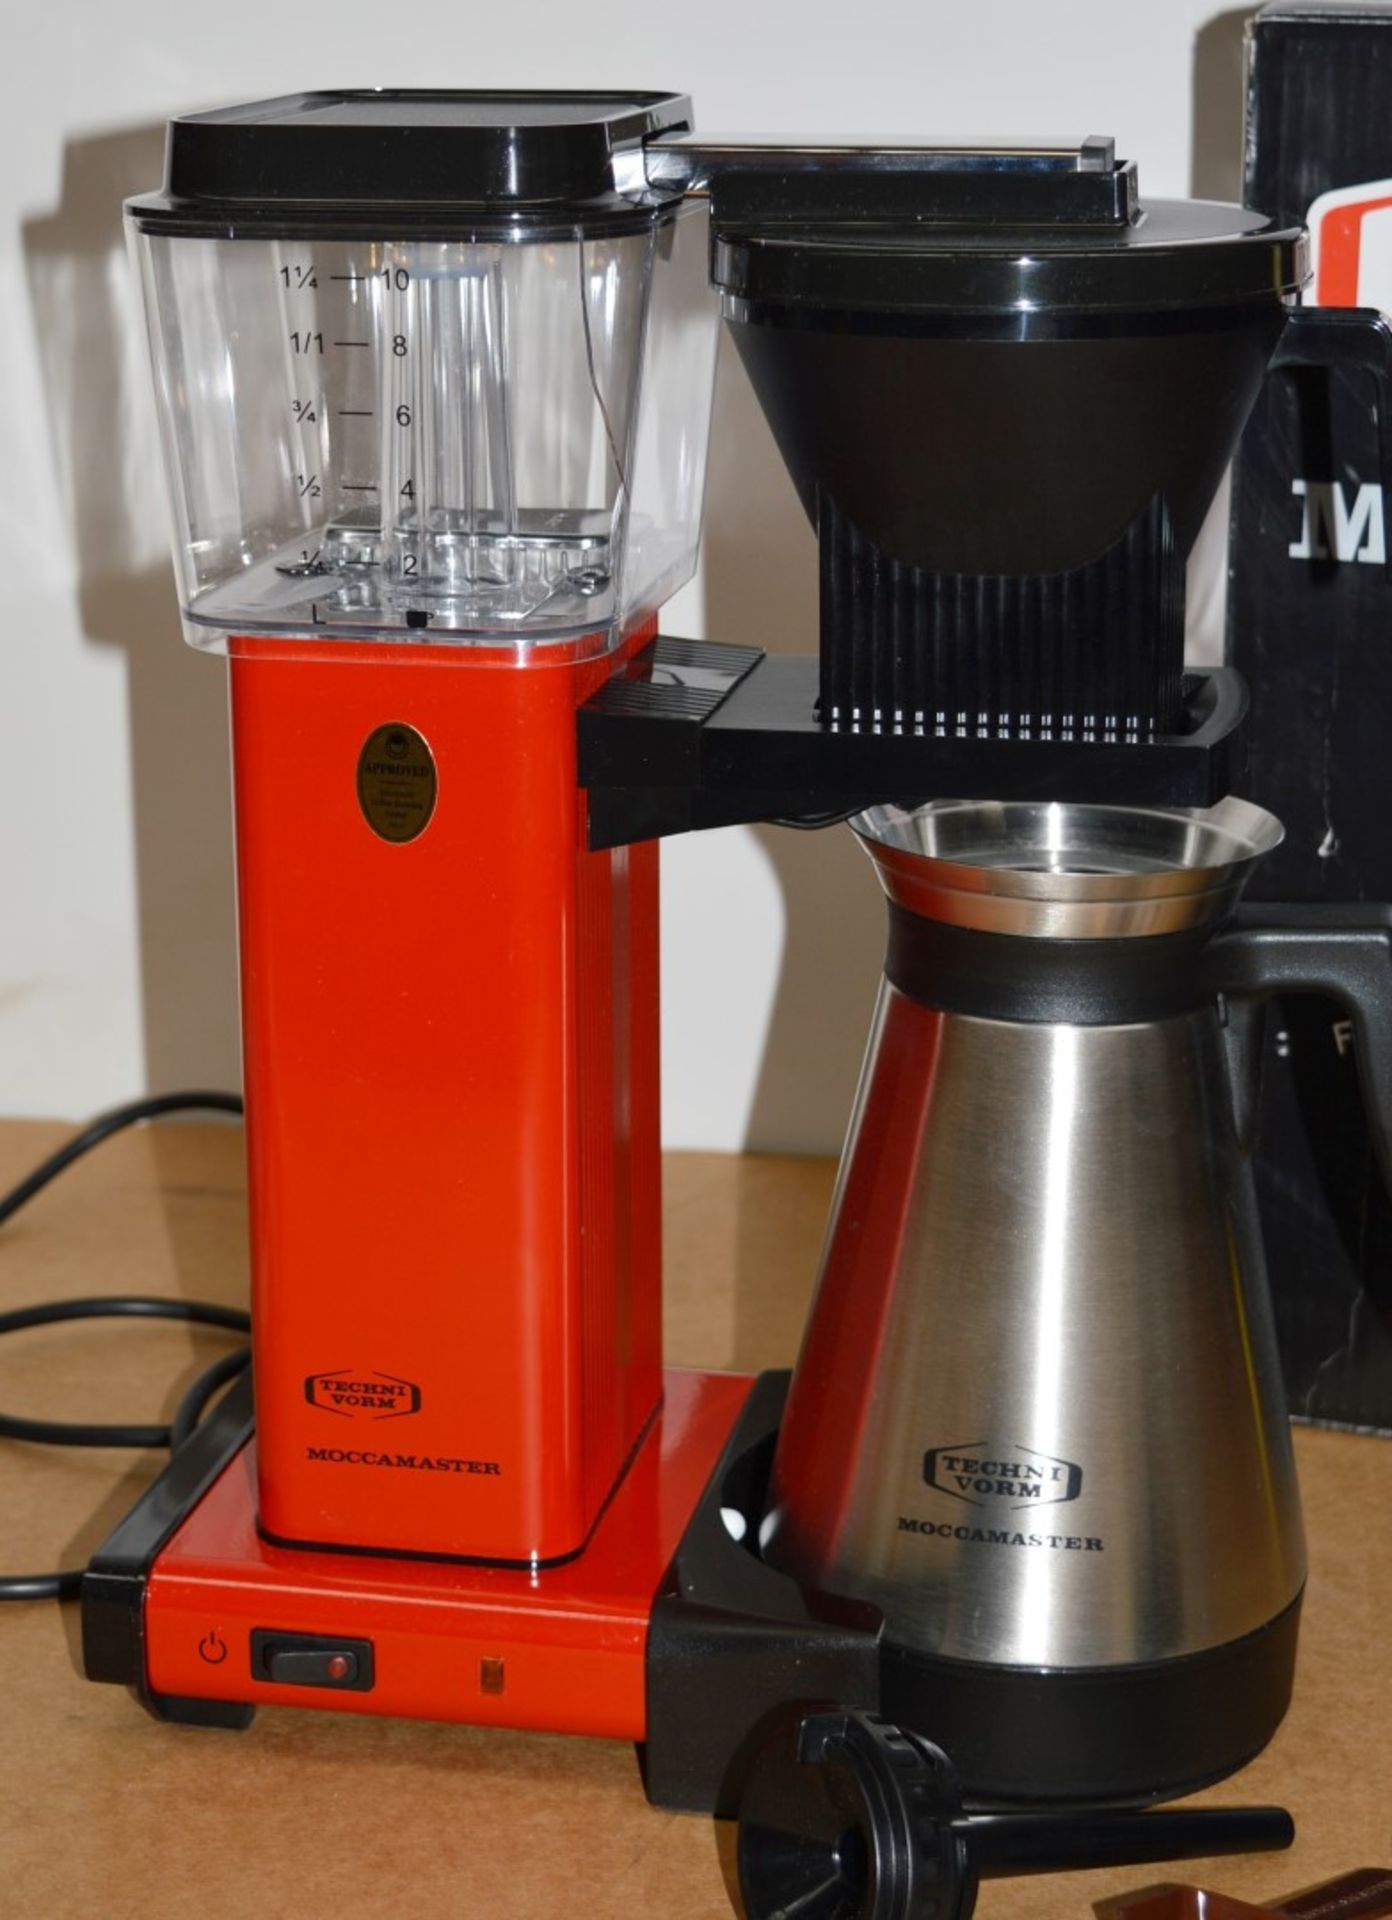 1 x Moccamaster 10 Cup Hand Made Coffee Maker - 240v - Premier Coffee Maker Combines Sleek - Image 2 of 14